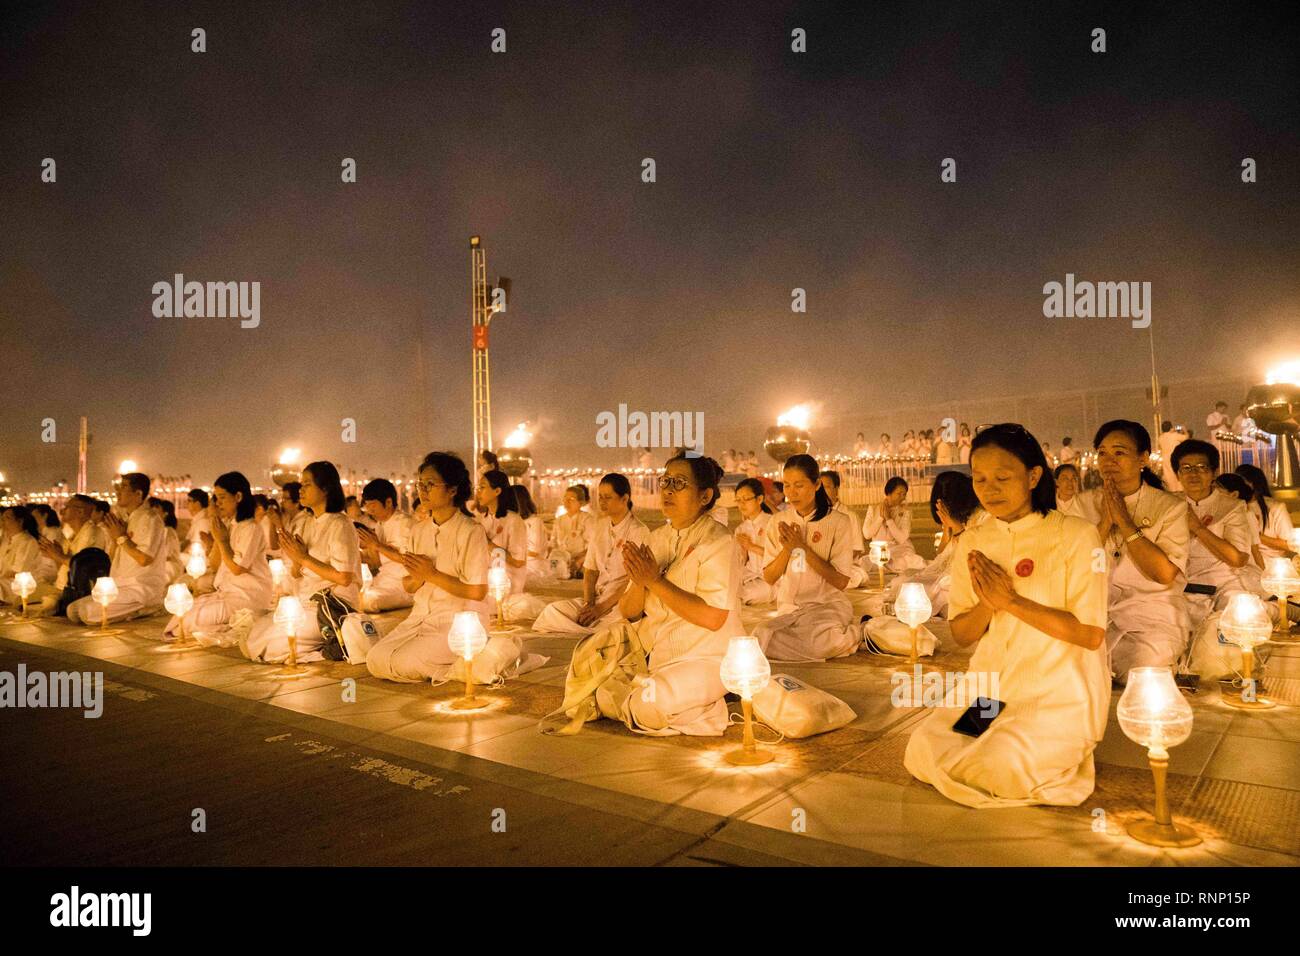 Bangkok, Thailand. 19th Feb, 2019. Devotees seen meditating with their lanterns during the yearly Makha Bucha ceremony. Buddhist devotees celebrate the annual festival of Makha Bucha, one of the most important day for buddhists around the world. More than a thousand monks and hundred of thousand devotees were gathering at Dhammakaya Temple in Bangkok to attend the lighting ceremony. Credit: Geovien So/SOPA Images/ZUMA Wire/Alamy Live News Stock Photo